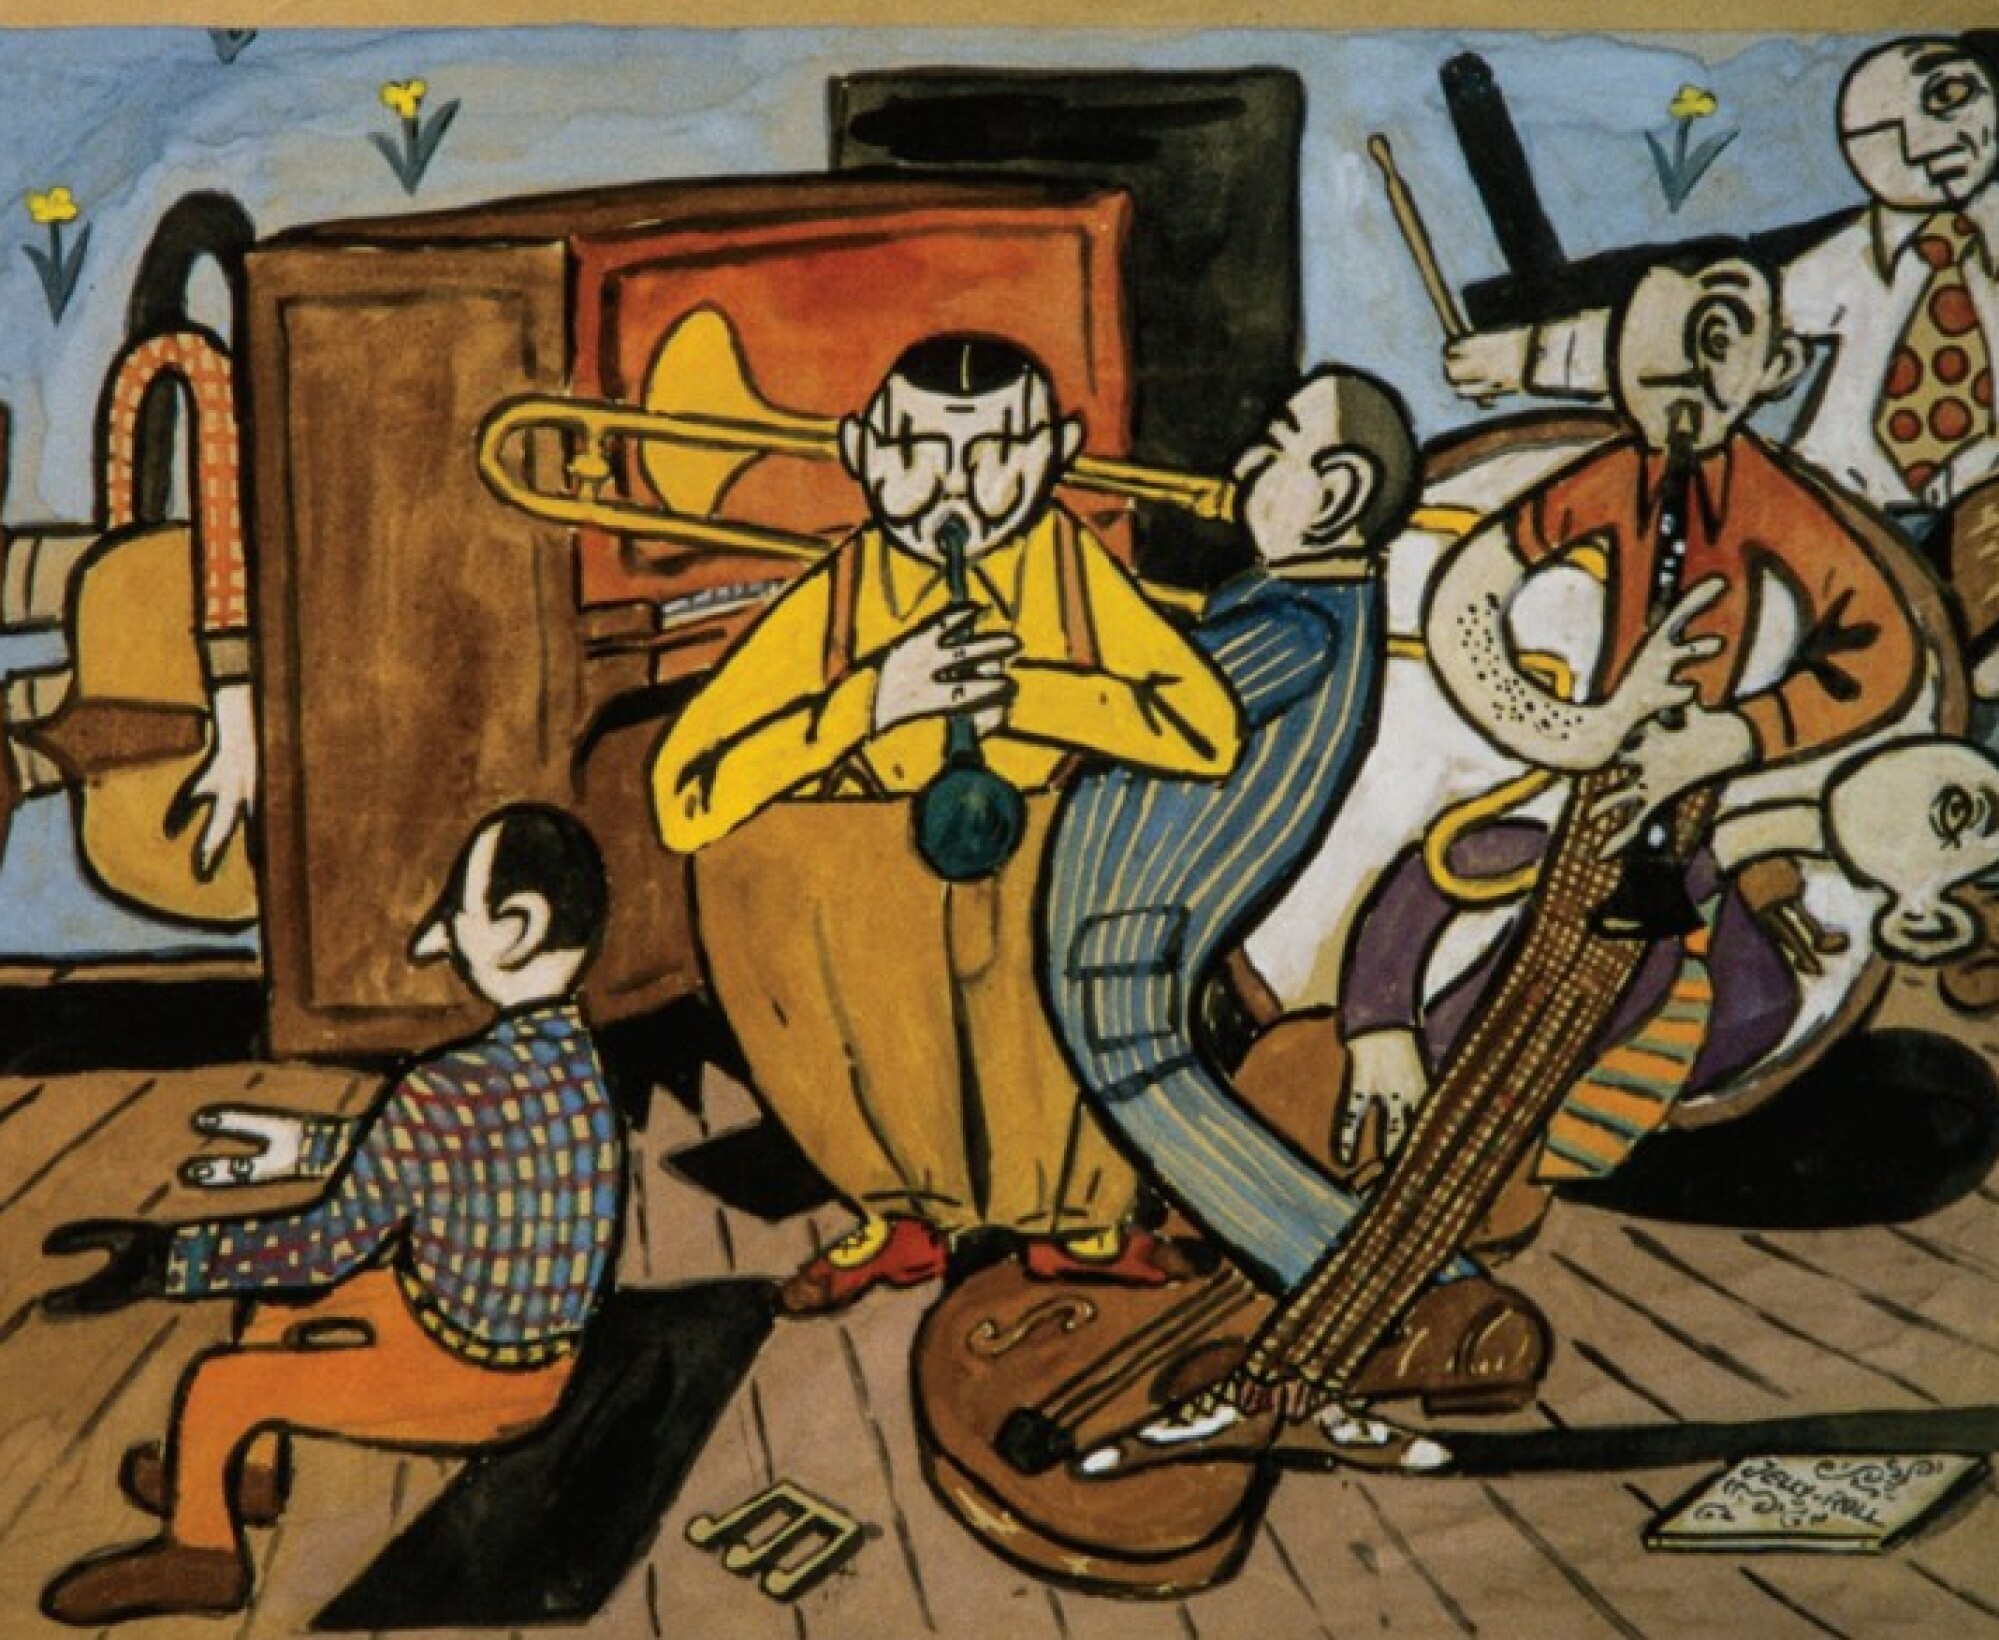 A colourful illustration featuring a music group with several individuals playing different instruments.